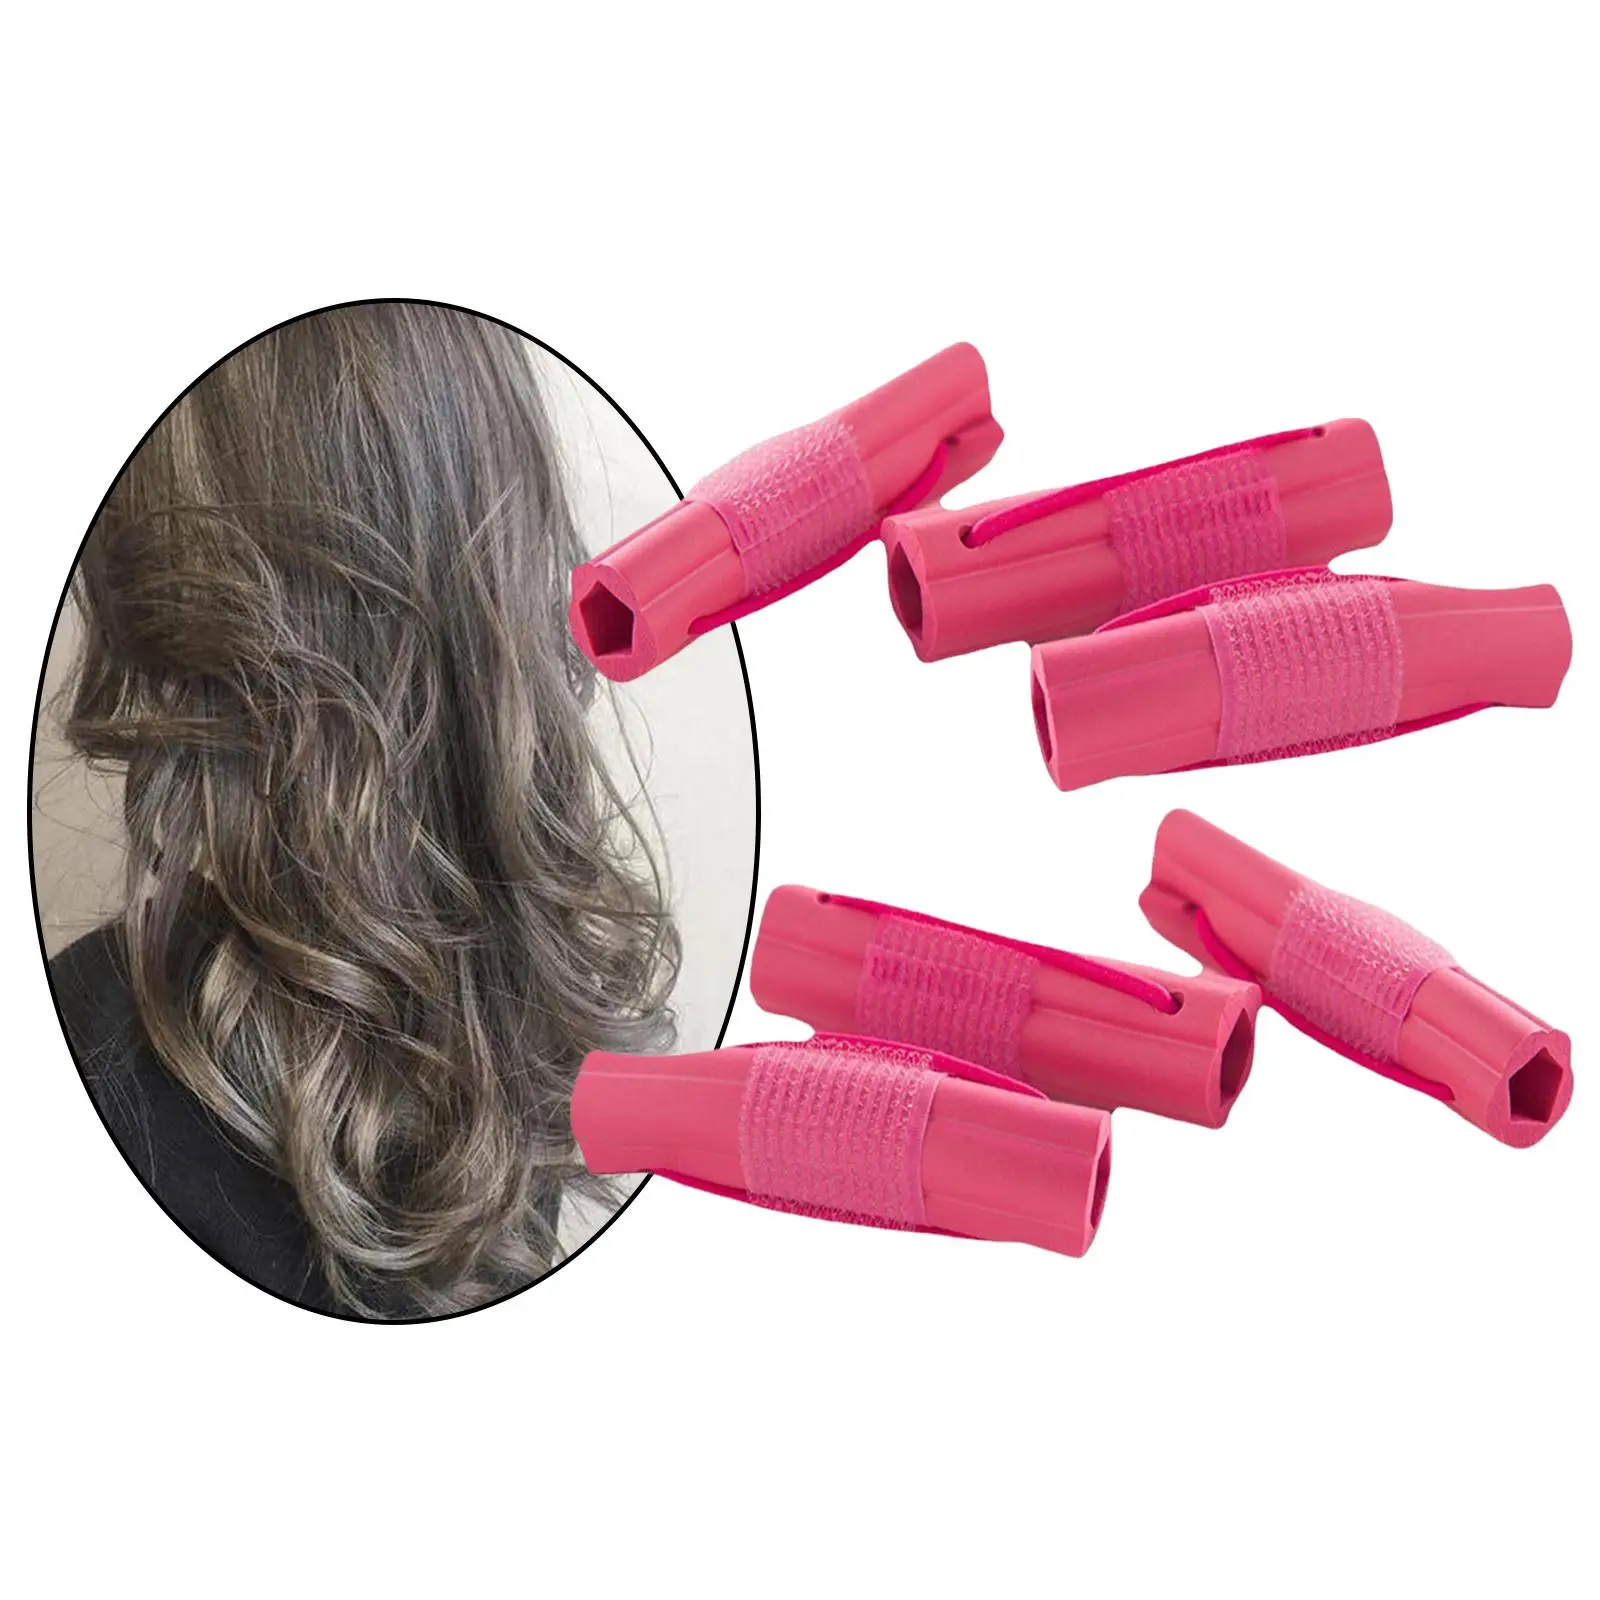 6 Count Silicon Sleep Hair Rollers Soft Practical Easy Application for Lazy People 